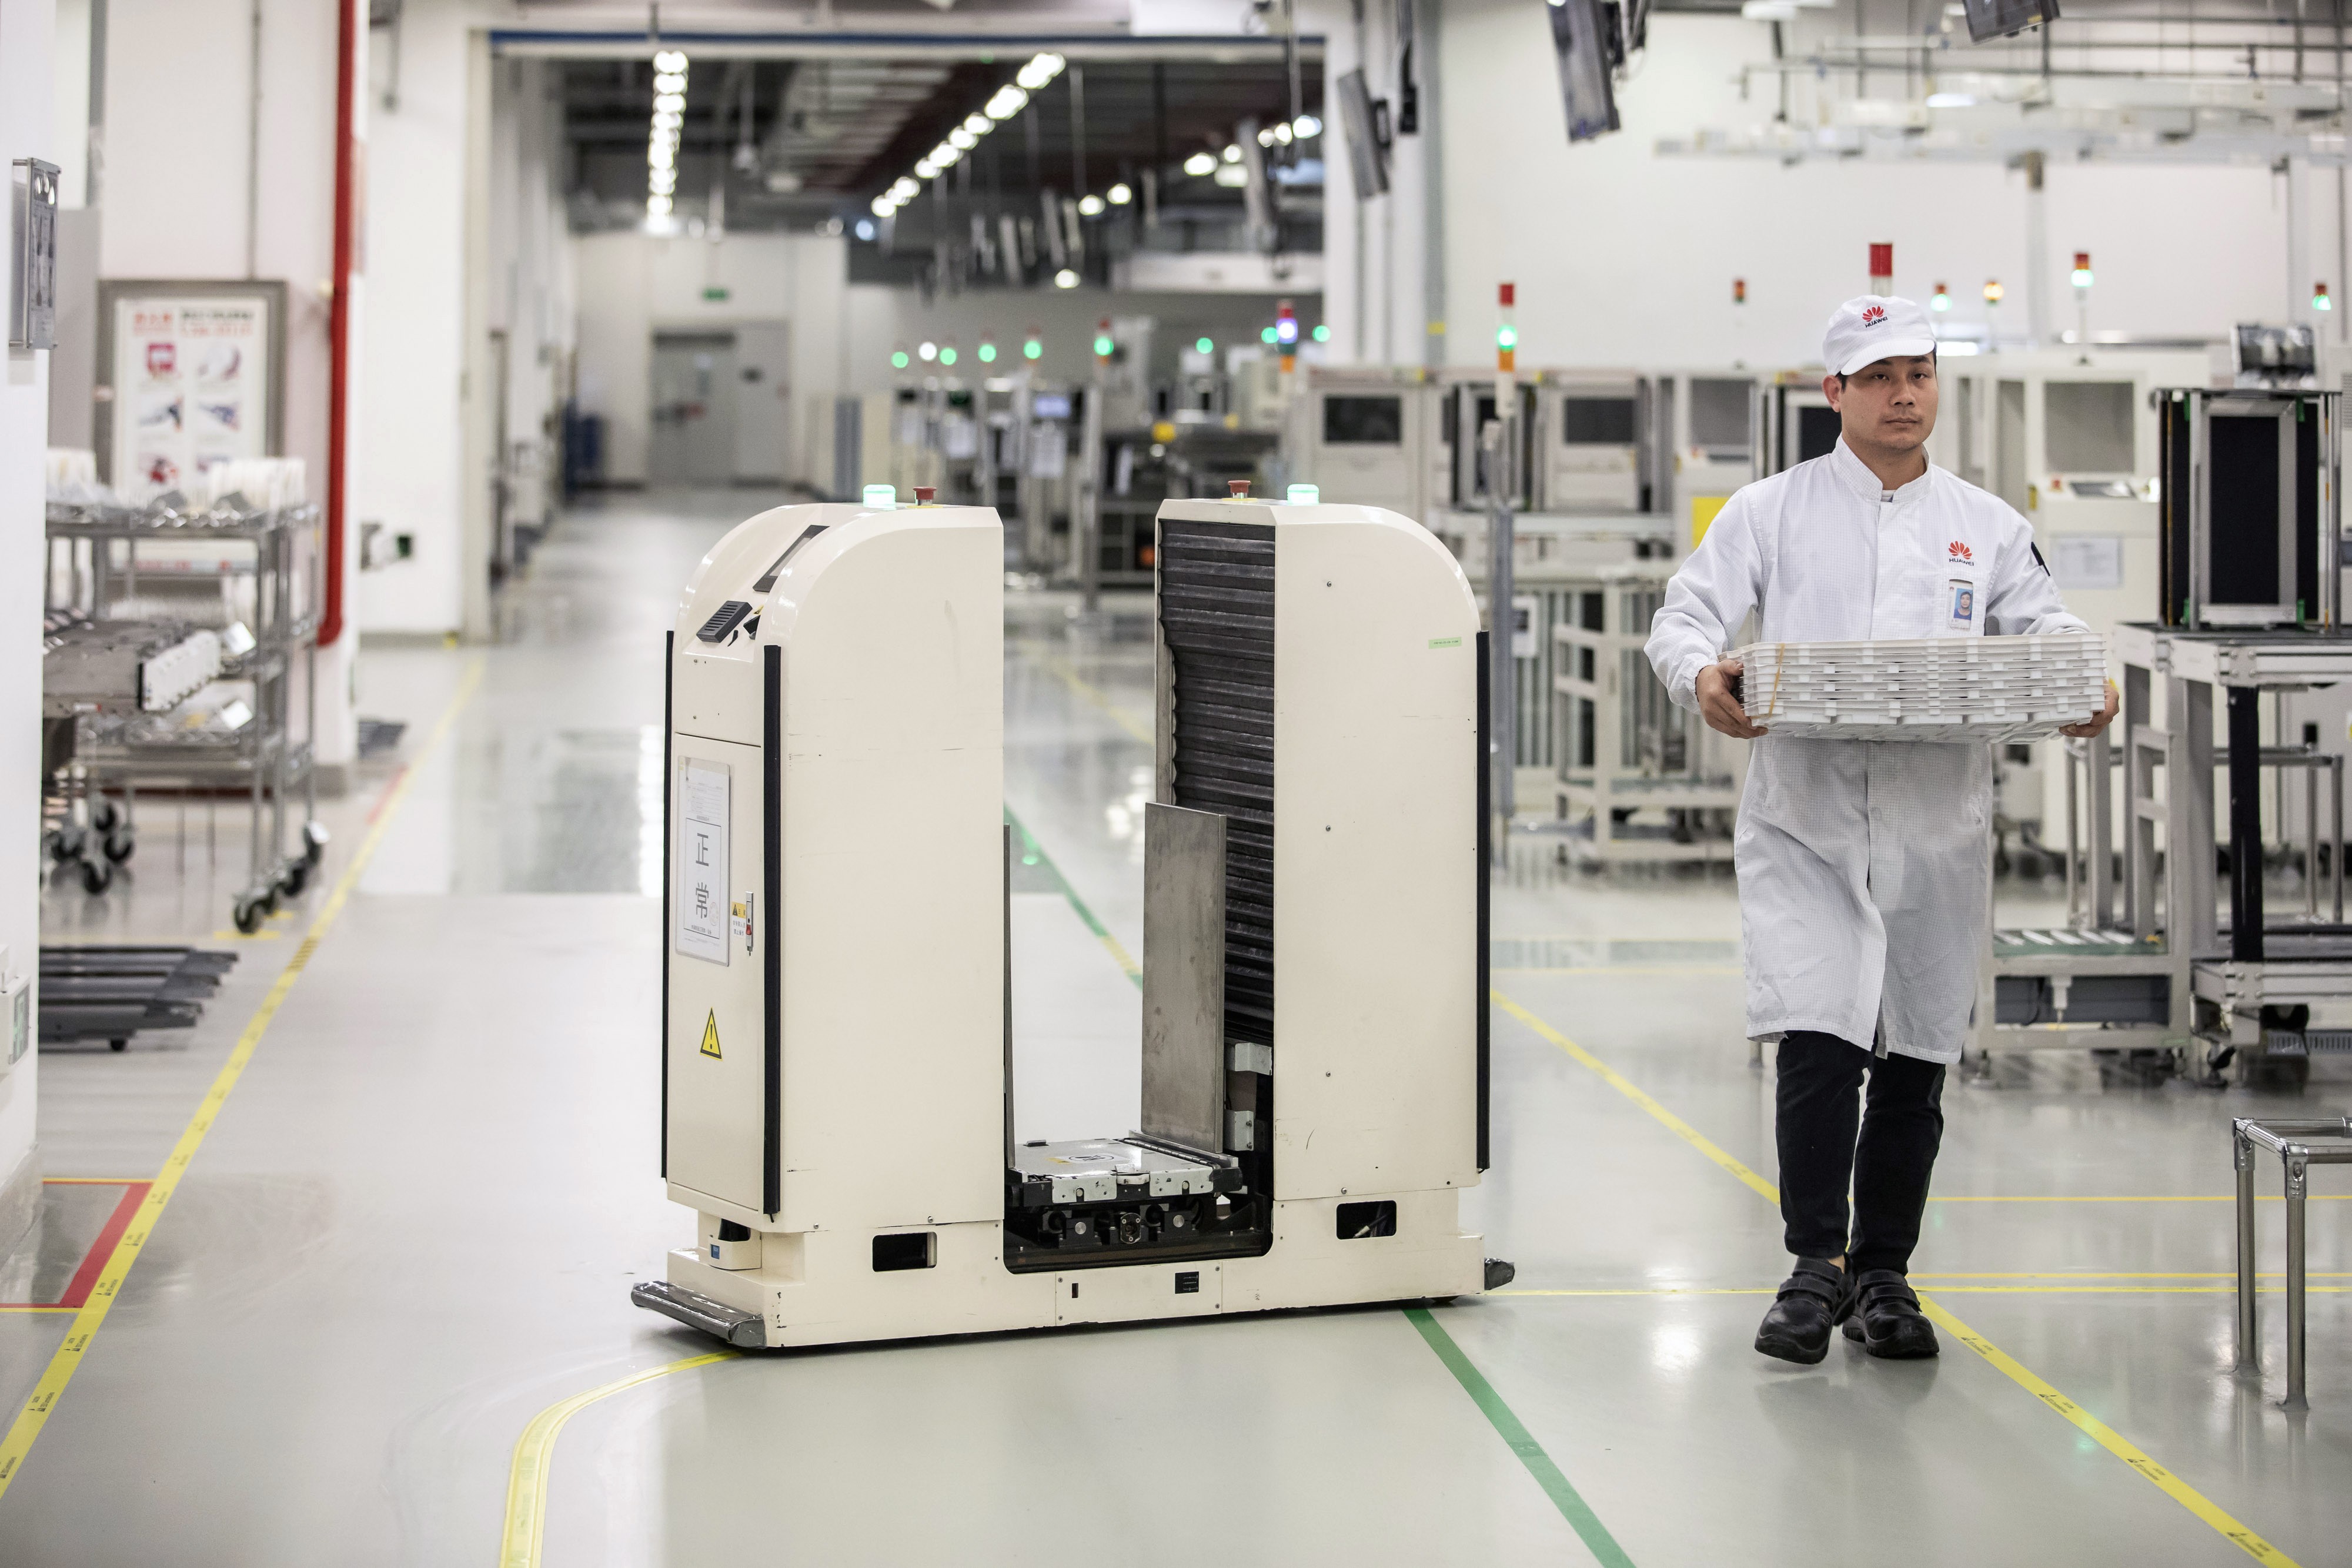 A robot passes an employee working on a mobile phone assembly line at a Huawei Technologies production base in Dongguan, China, on Wednesday, March 6, 2019. Photo: Bloomberg